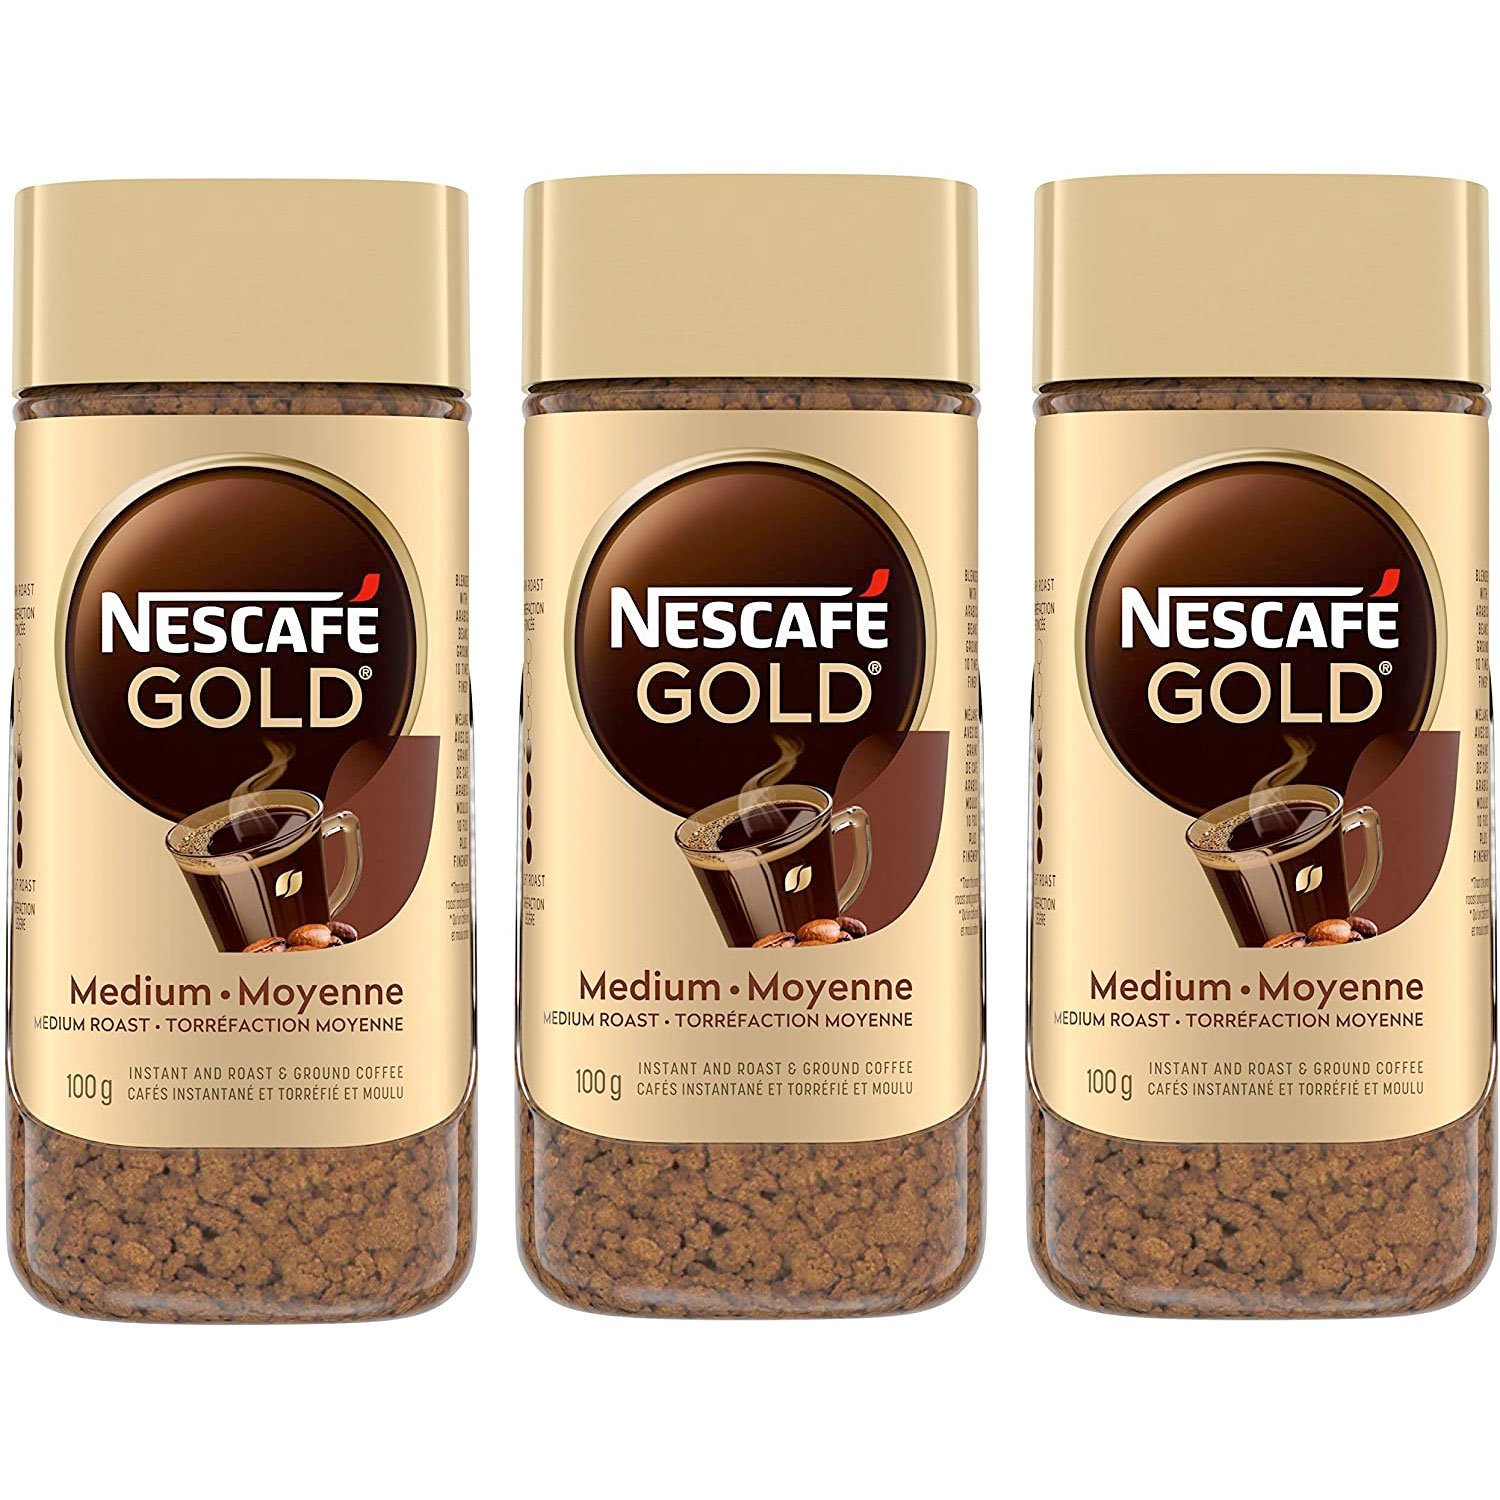 Amazon：NESCAFÉ Gold Instant and Roast & Ground Coffee 100g (3 Count)只卖$17.91